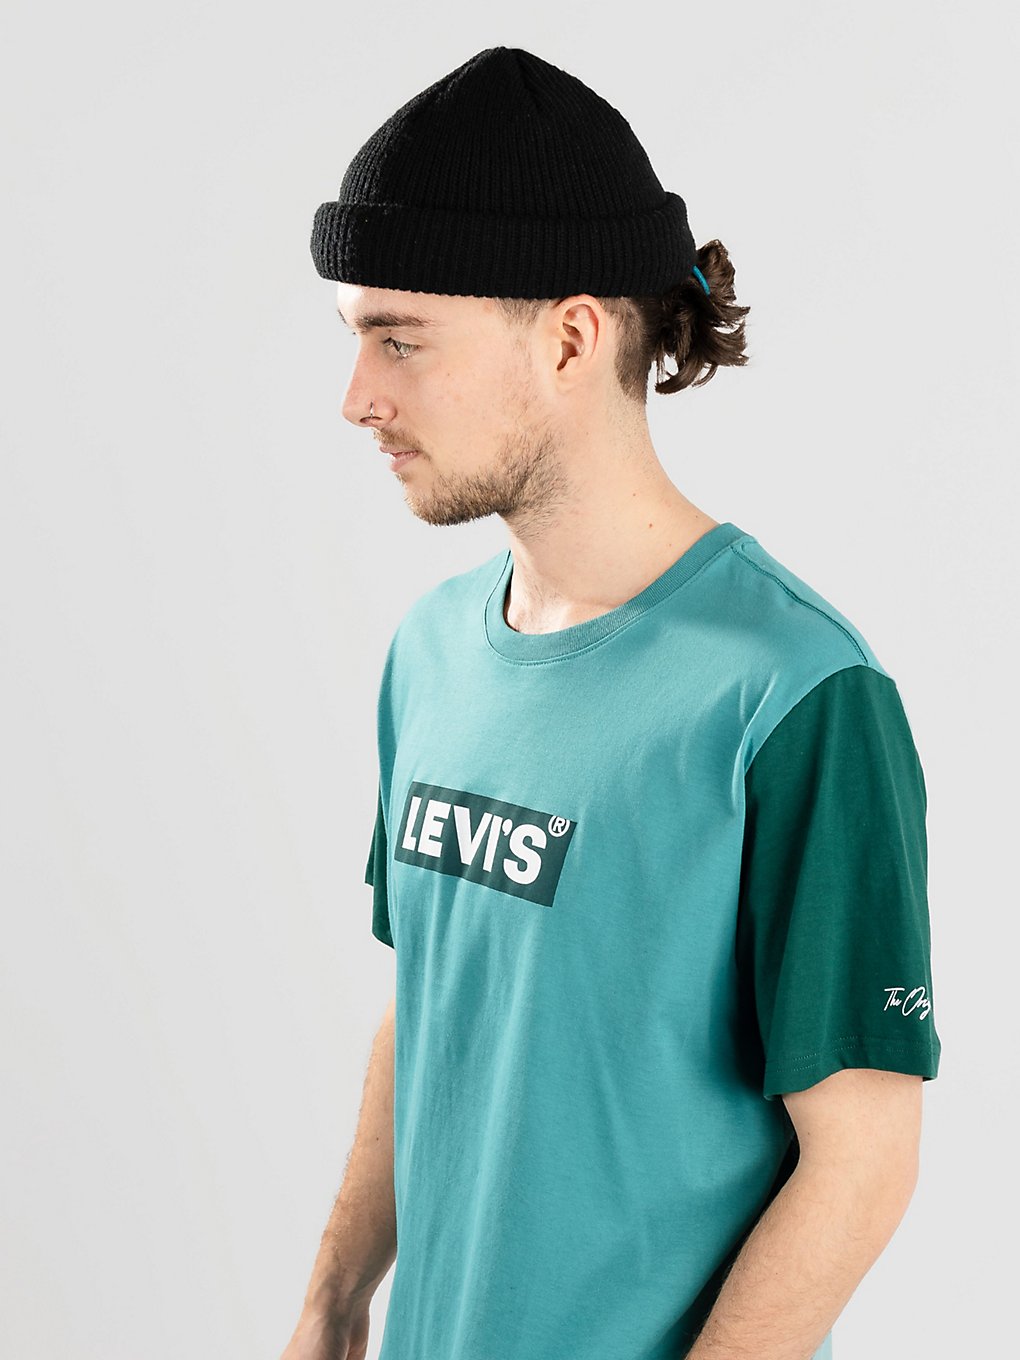 Levi's Relaxed Fit Reds T-Shirt blu slate kaufen